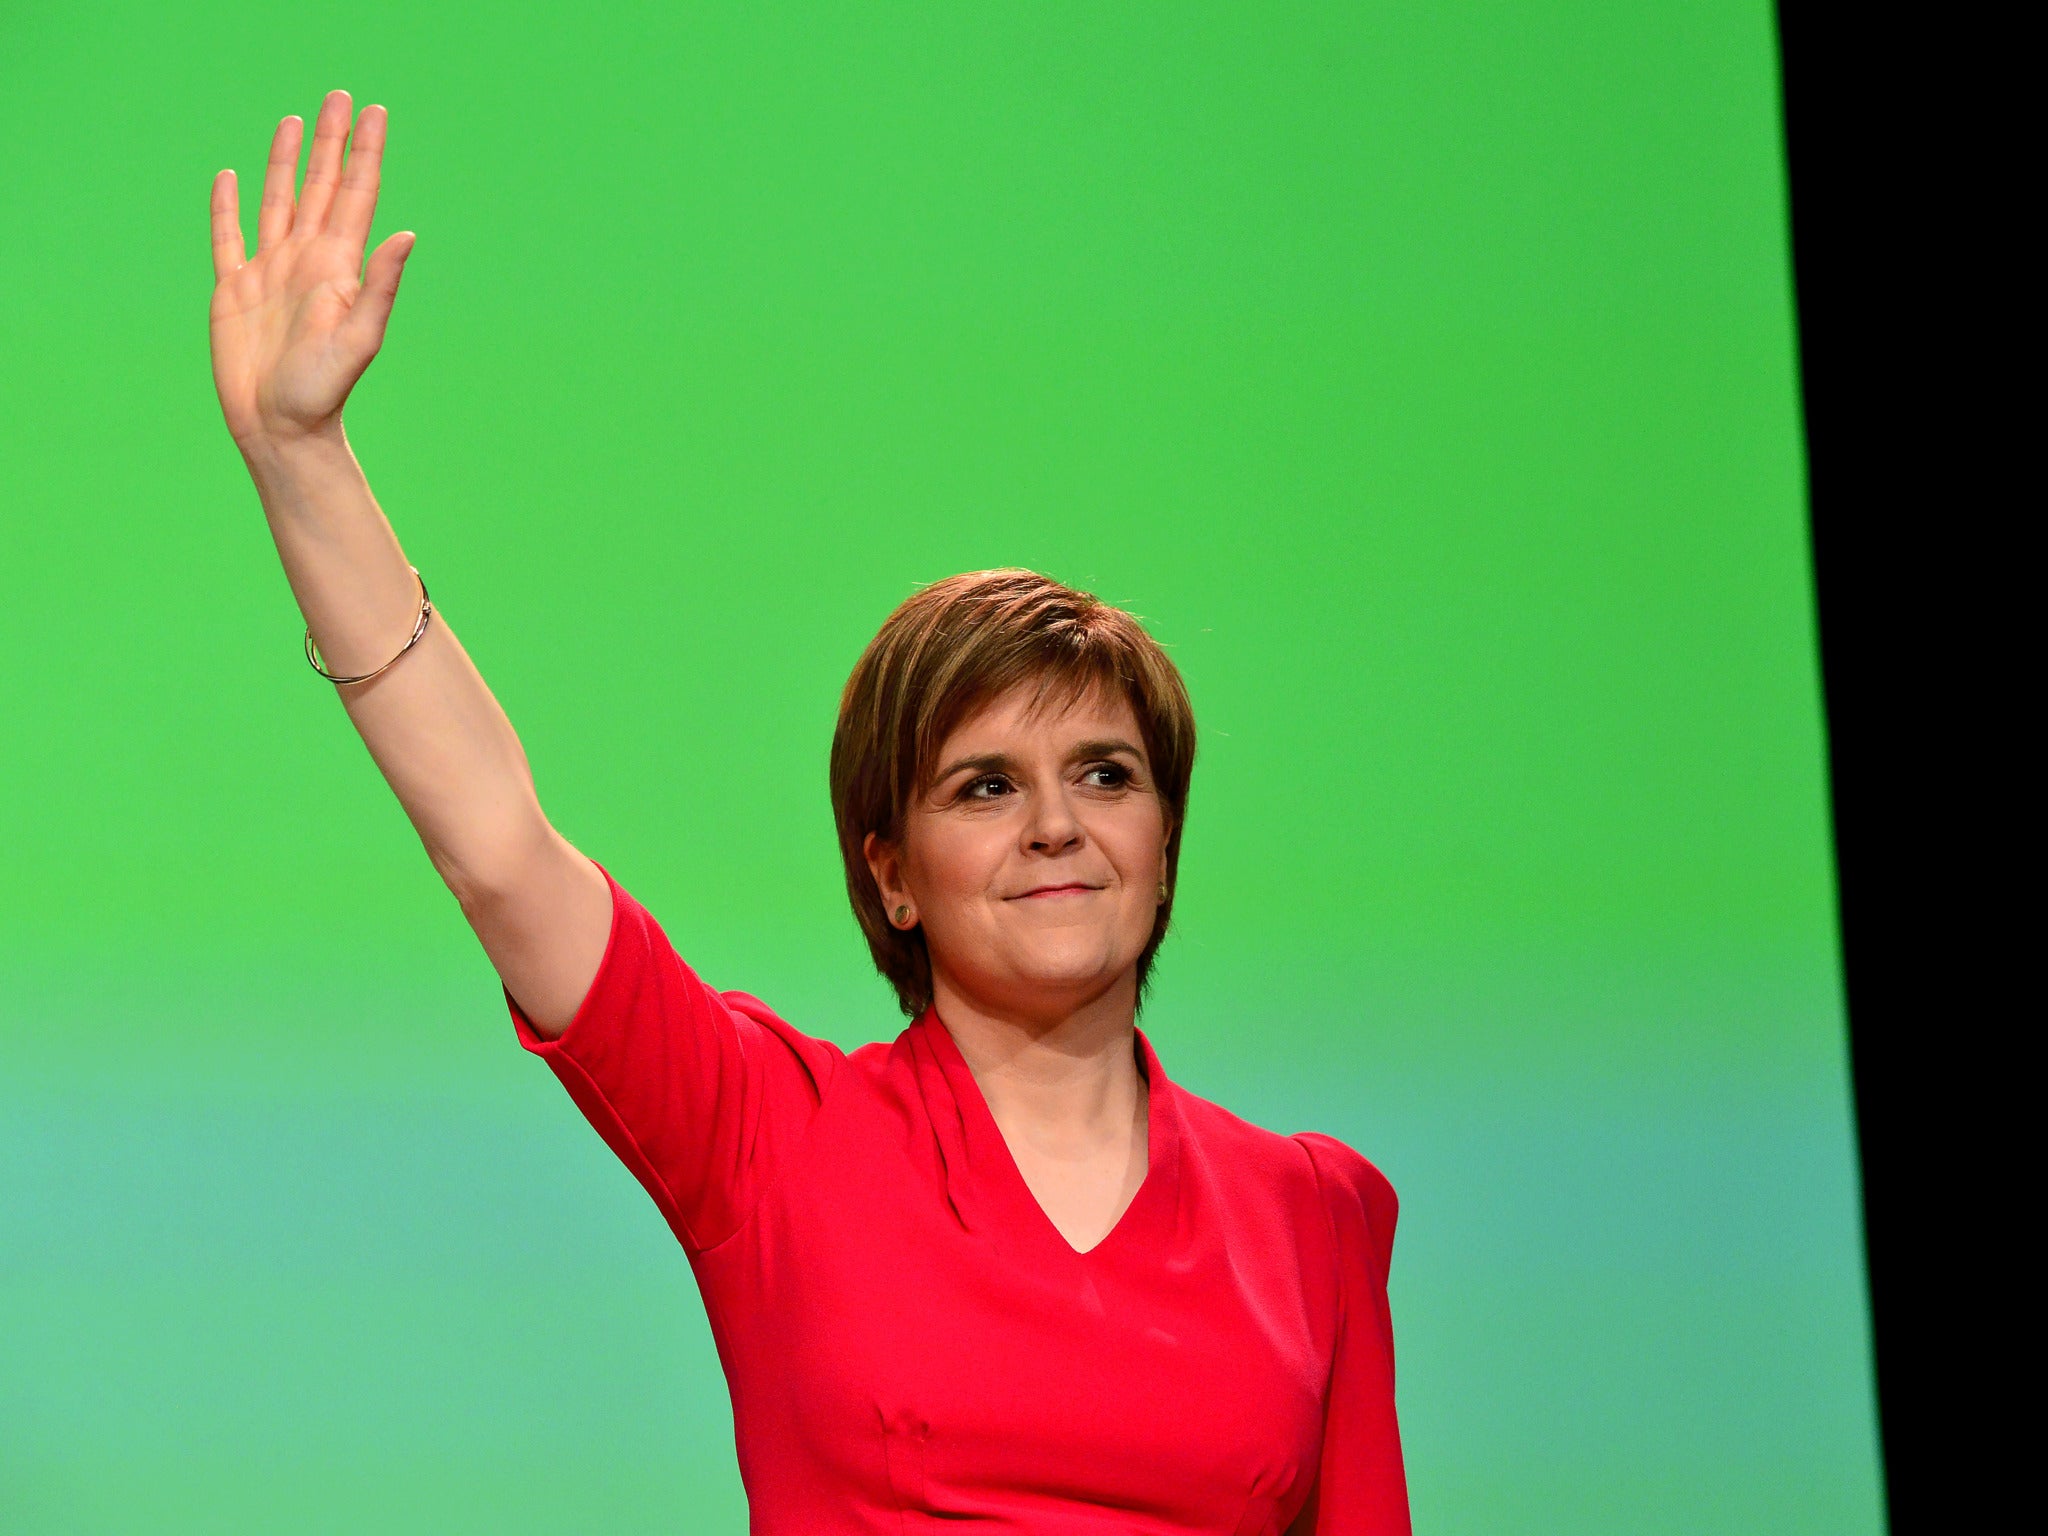 Nicola Sturgeon and the SNP are enjoying continued popularity